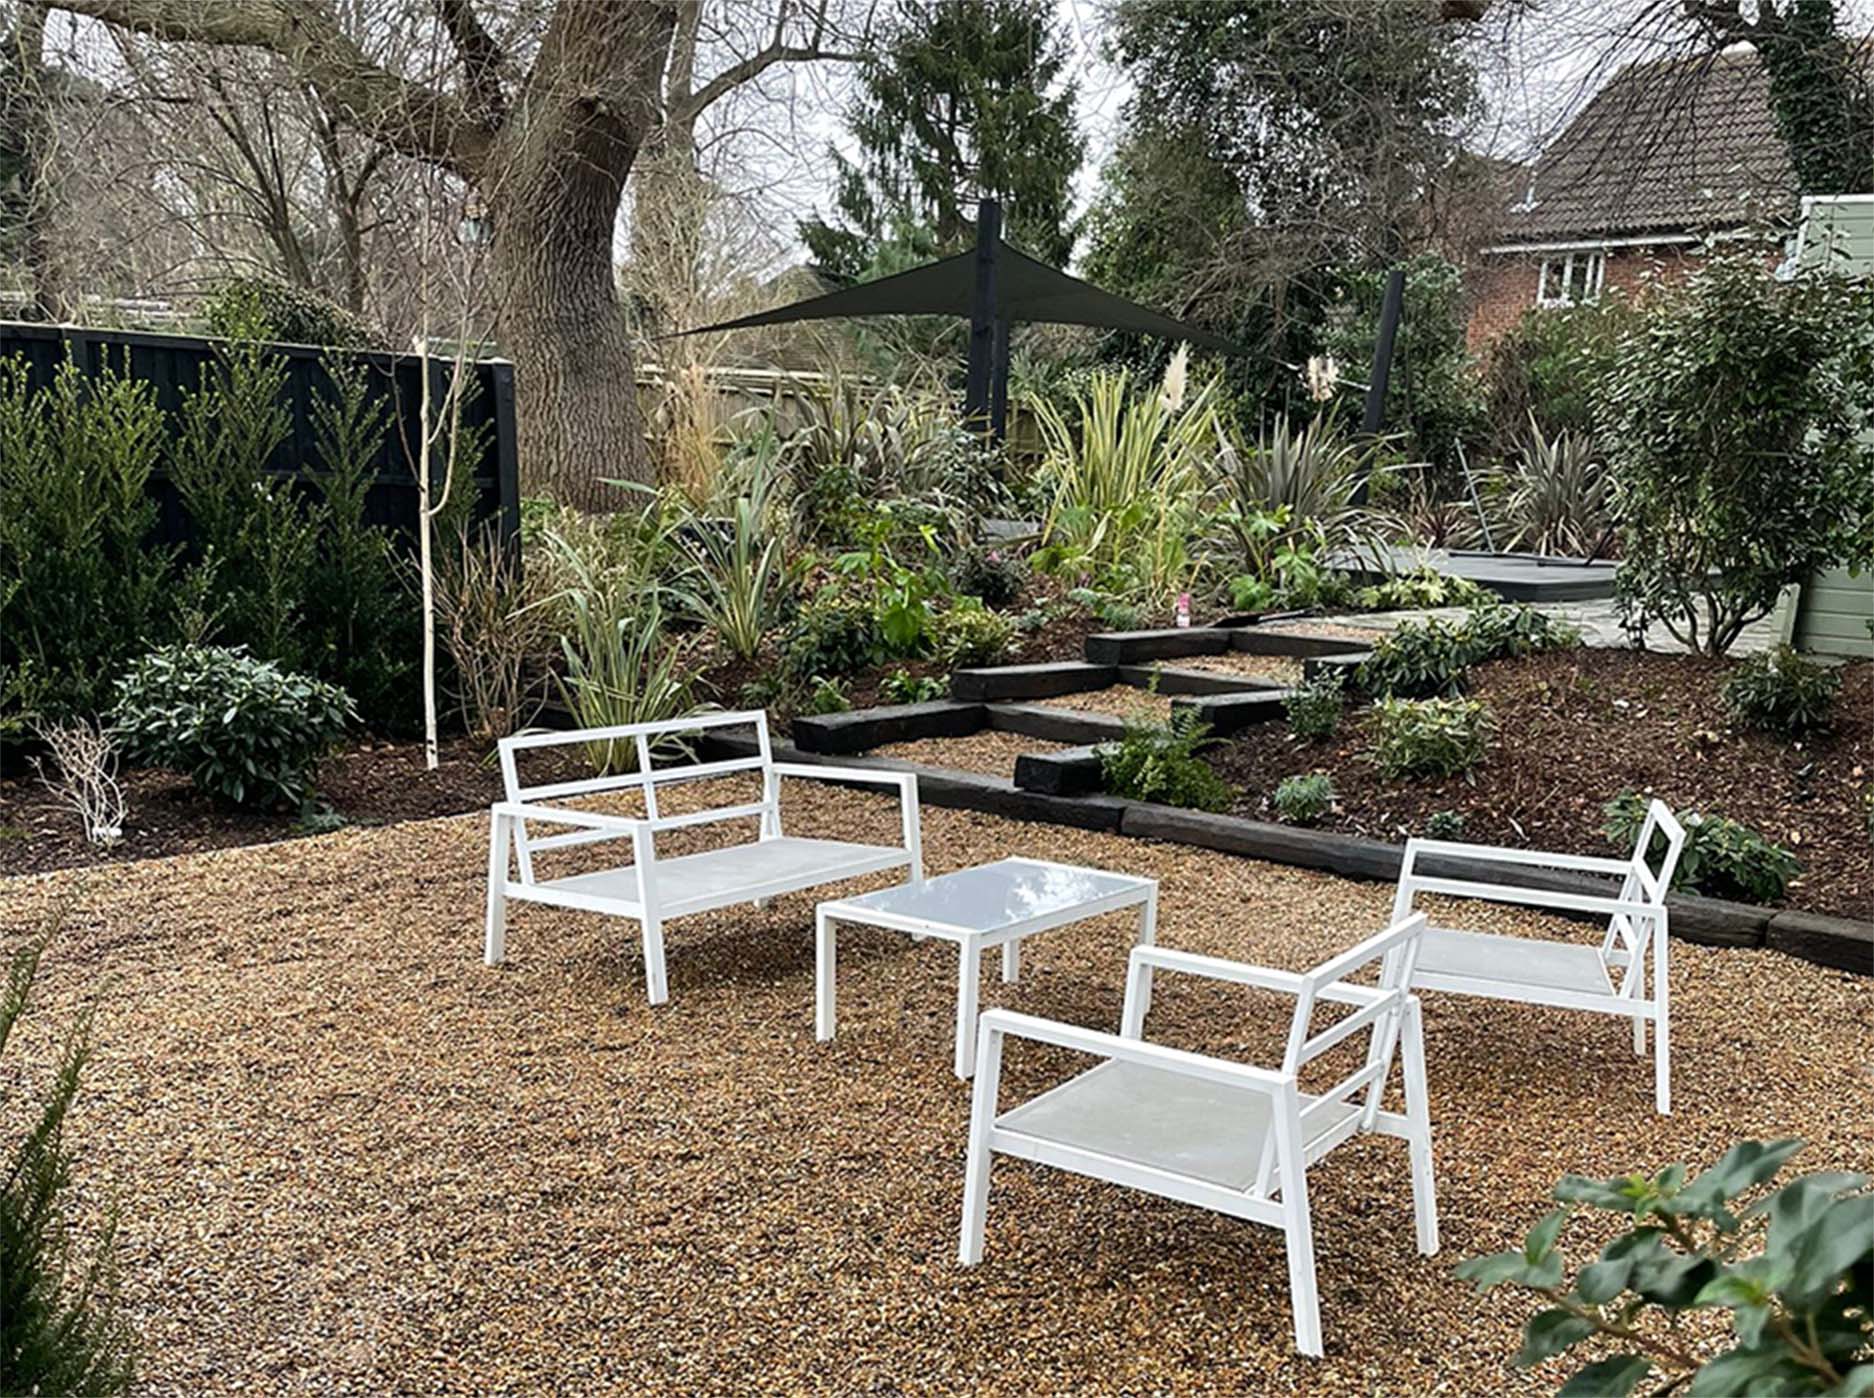 A well kept garden with white furniture in the foreground